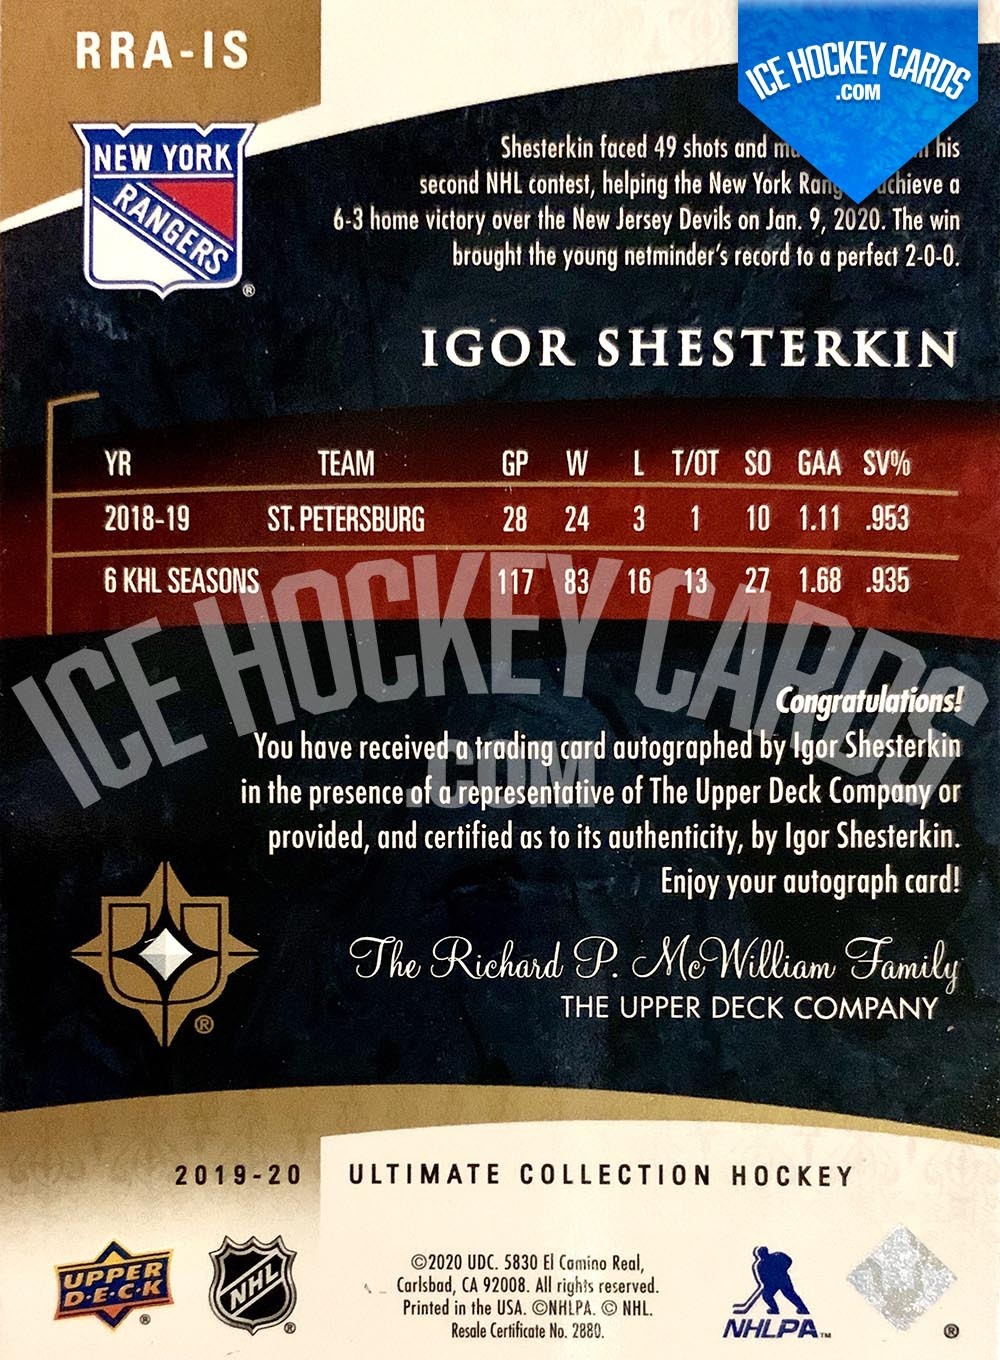 Upper Deck - Ultimate Collection 2019-20 - Igor Shesterkin Ultimate Rookies Auto RC back